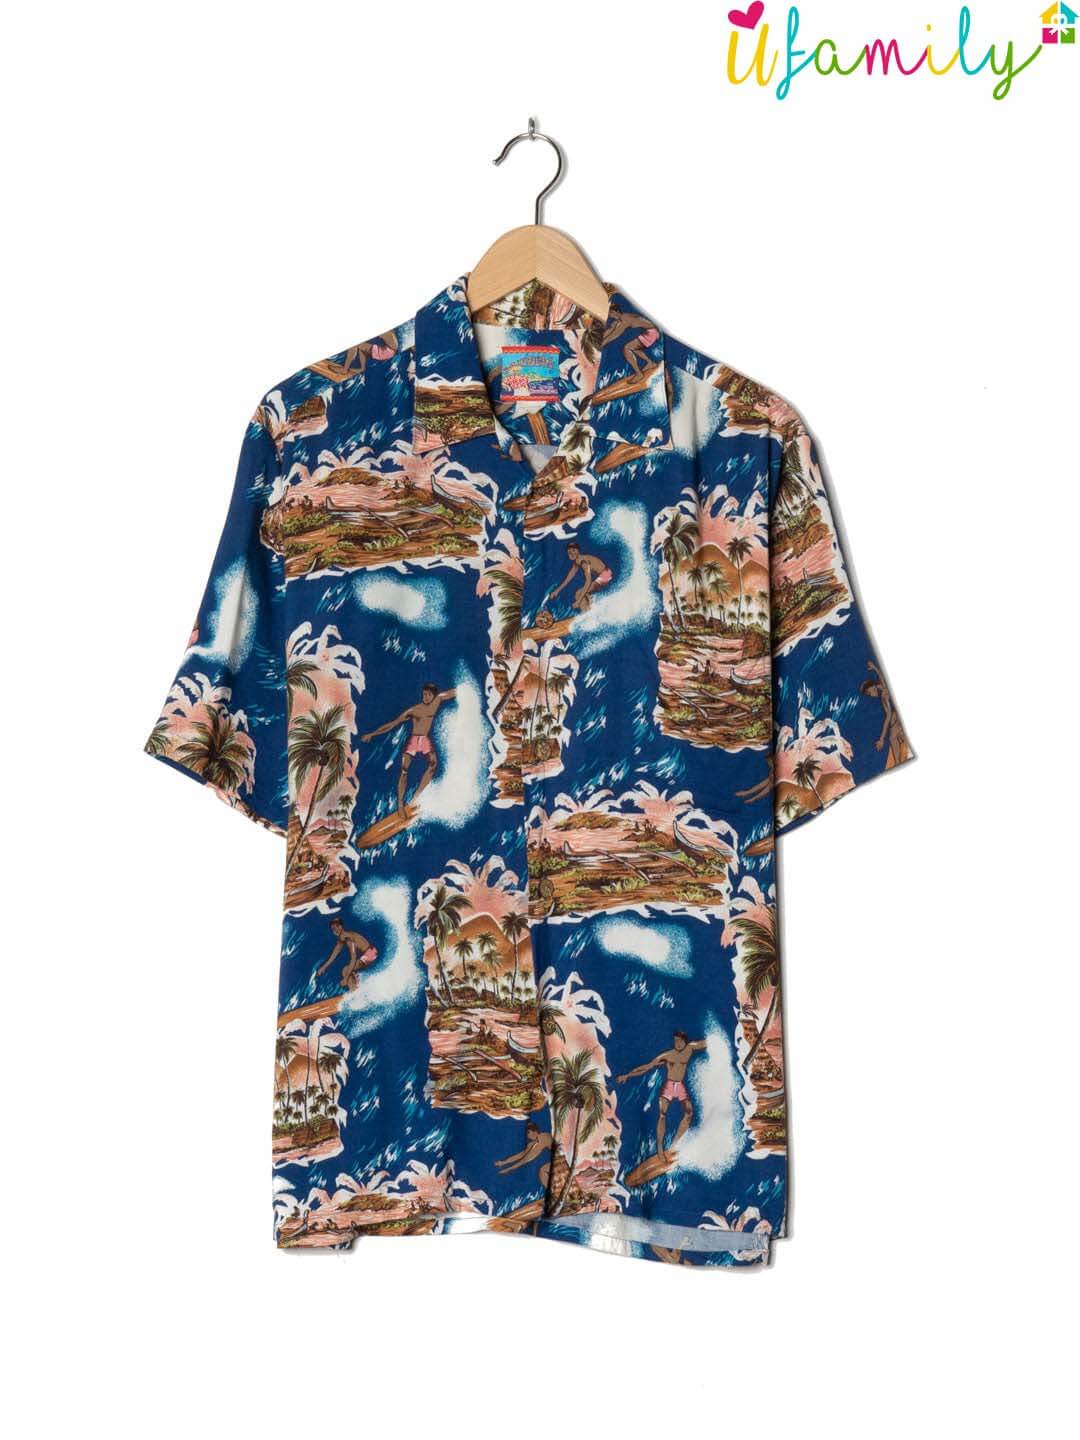 If you have a Hawaiian shirt that is floral and traditional, consider wearing it with clean, crisp denim. 